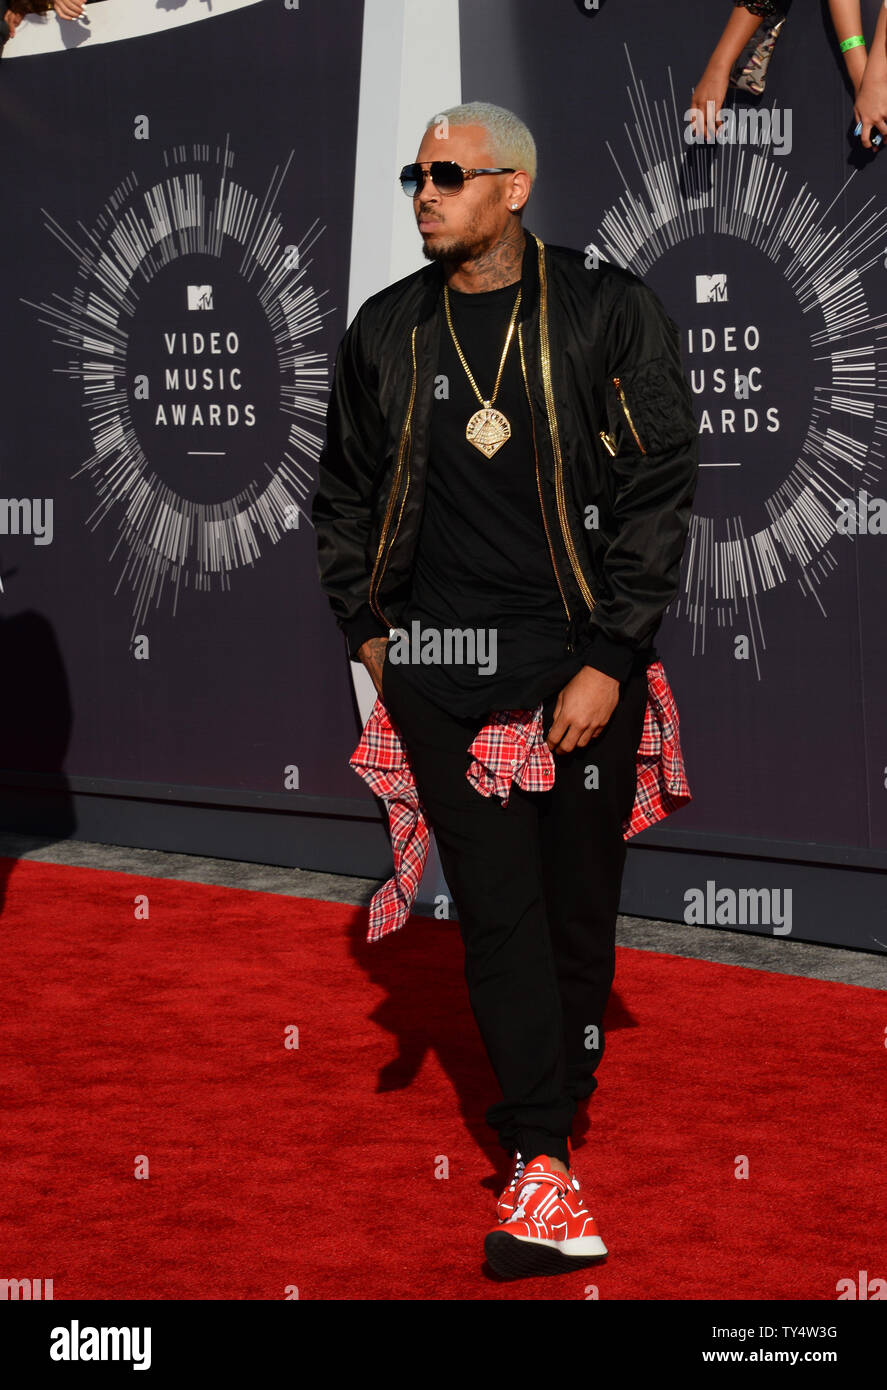 Chris Brown arrives at the 2014 MTV Video Music Awards at the Forum in Inglewood, California on August 24, 2014.  UPI/Jim Ruymen Stock Photo